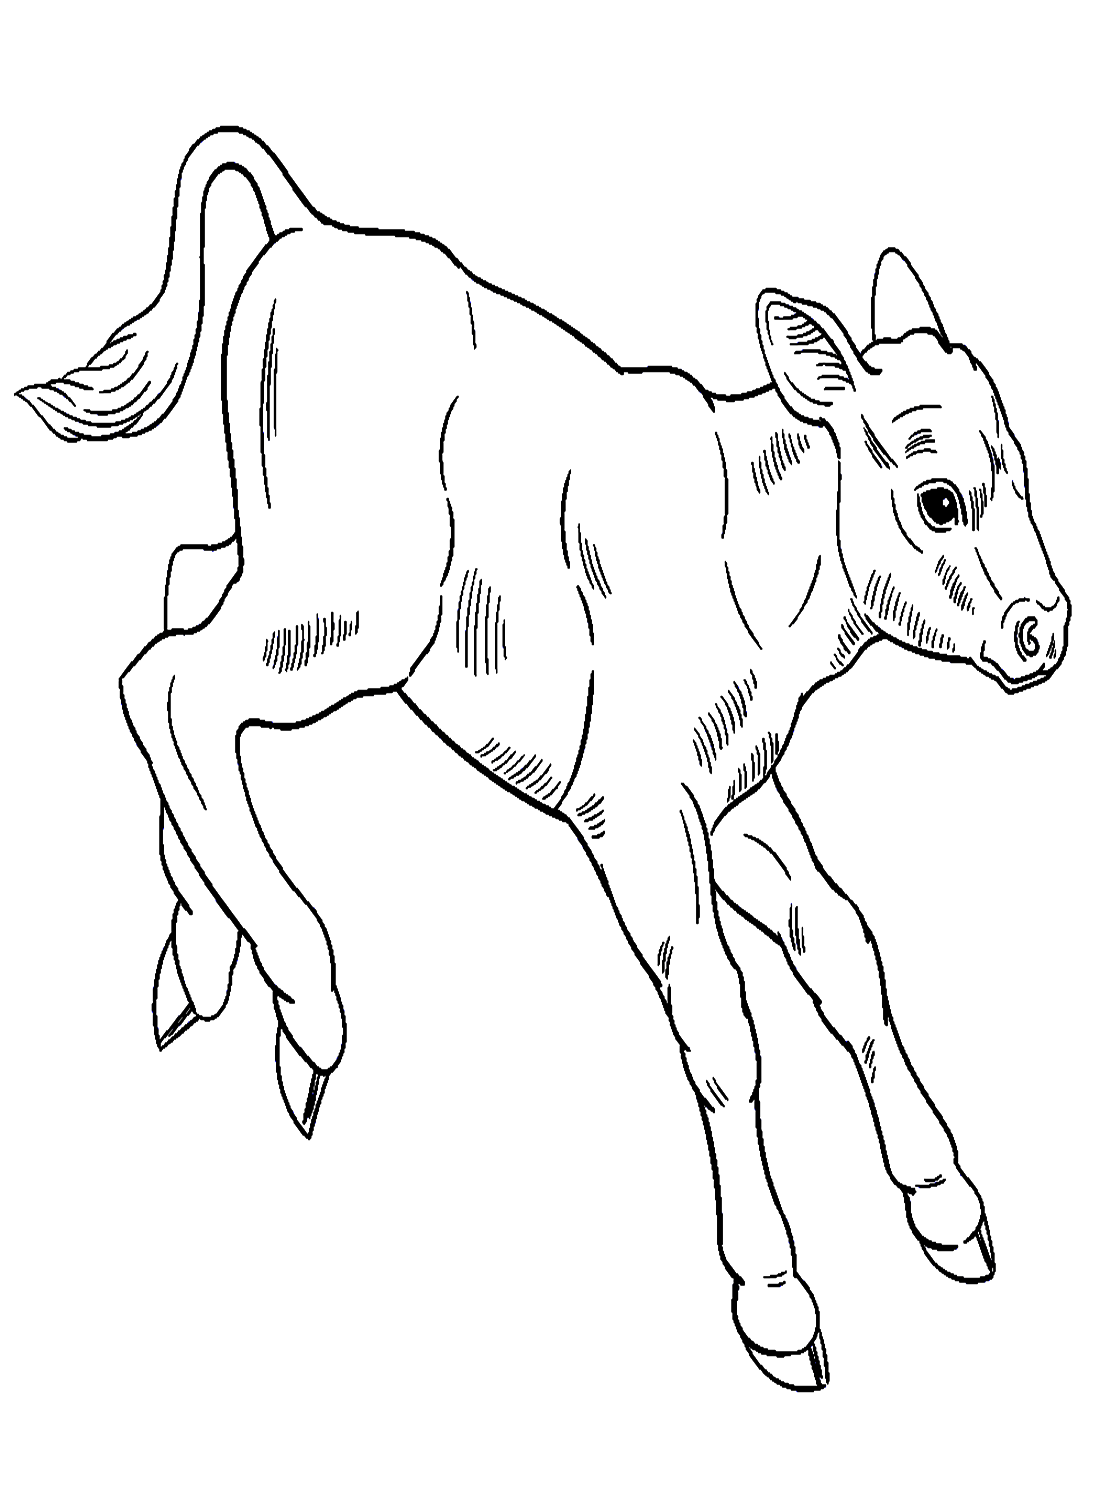 Calf Jumping Coloring Page - Free Printable Coloring Pages